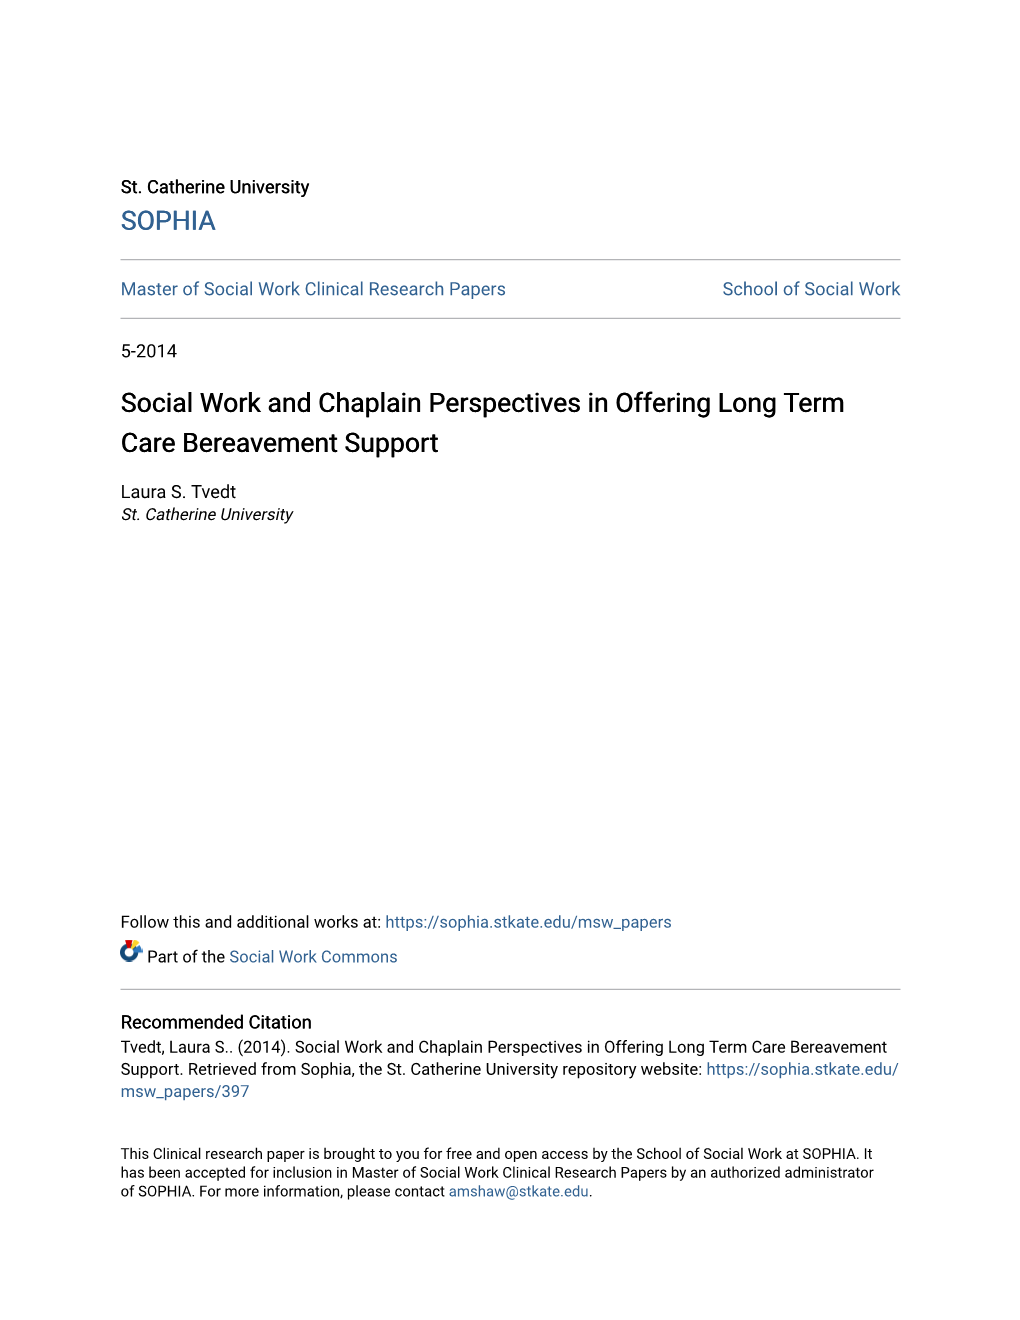 Social Work and Chaplain Perspectives in Offering Long Term Care Bereavement Support